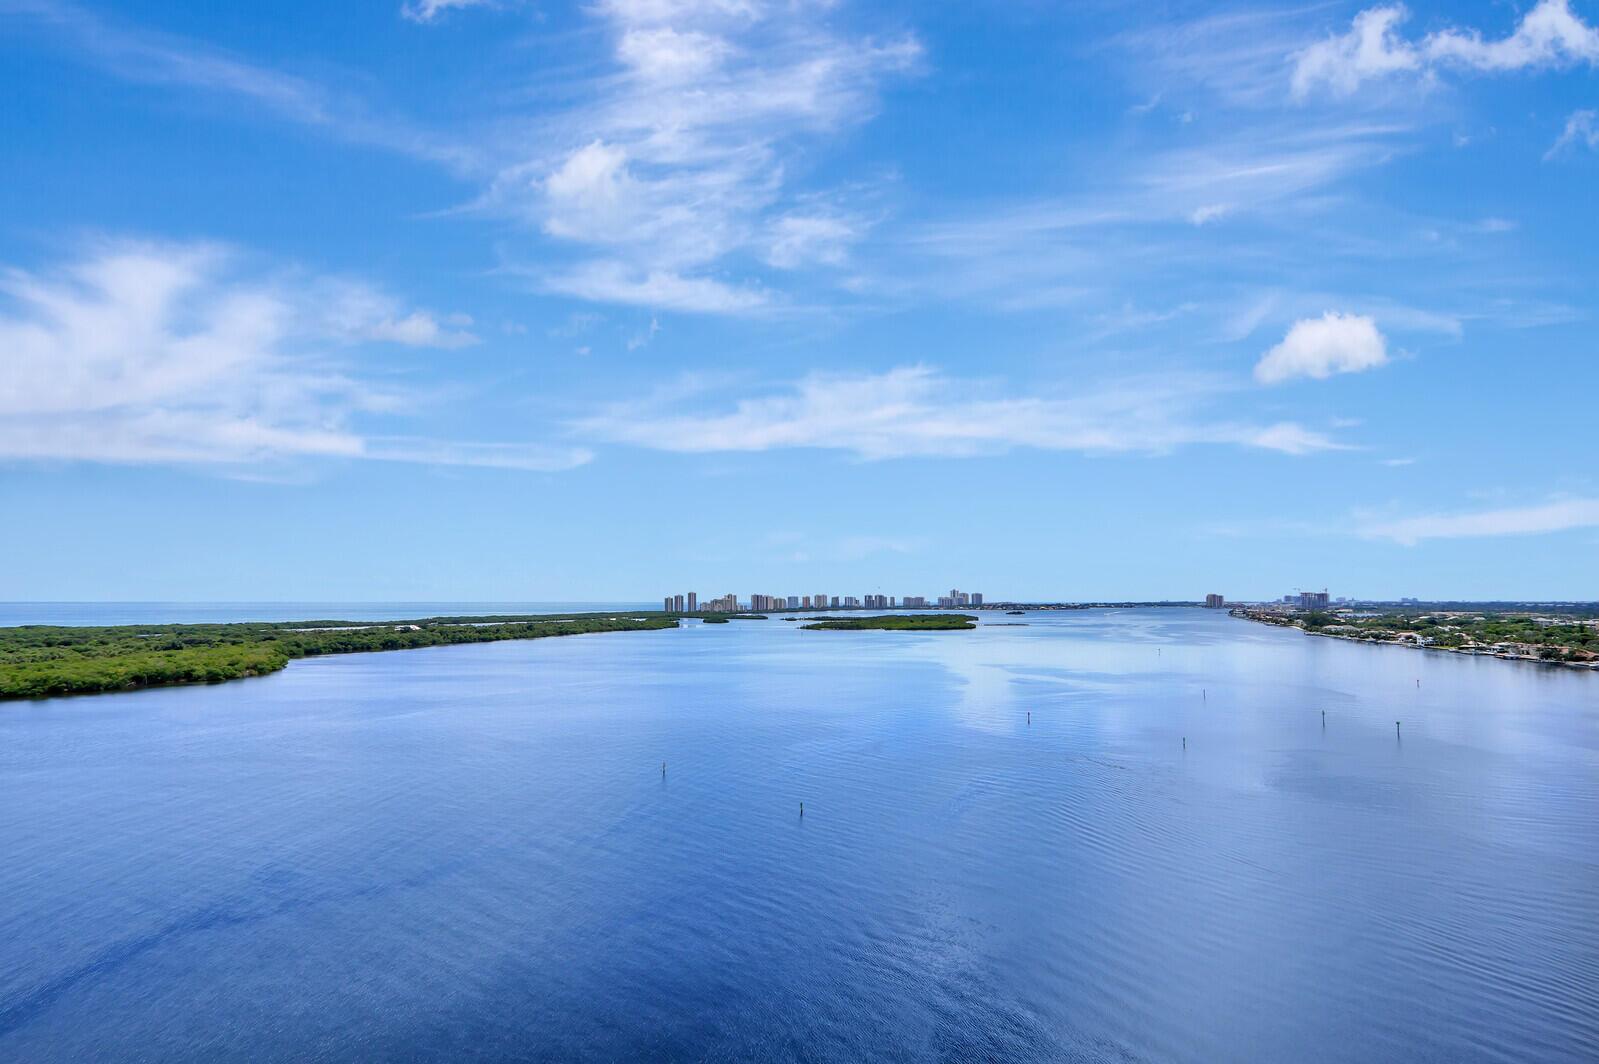 Unobstructed Ocean and Intracoastal Views.  See all the boats go by heading to the inlet. This is an exceptional floor plan with generous room sizes and a very large recessed balcony that protects you from the winds. Upgraded ceiling, lighting and large marble floor tiles in all the main living areas. 28' x 19' living room. Very open with incredible light coming in from the floor to ceiling windows in every room. Luxury building with 24-hour lobby attendant, new pool under construction, new gym is completed, garage parking. Old Port Cove Community features a 24-hr manned gatehouse, 2 mile waterfront walking path, on-site restaurant and marina. Interested in leasing a boat slip, Old Port Cove Marina for availability. Close to world-class shopping & dining. 5 minutes to the Beaches.